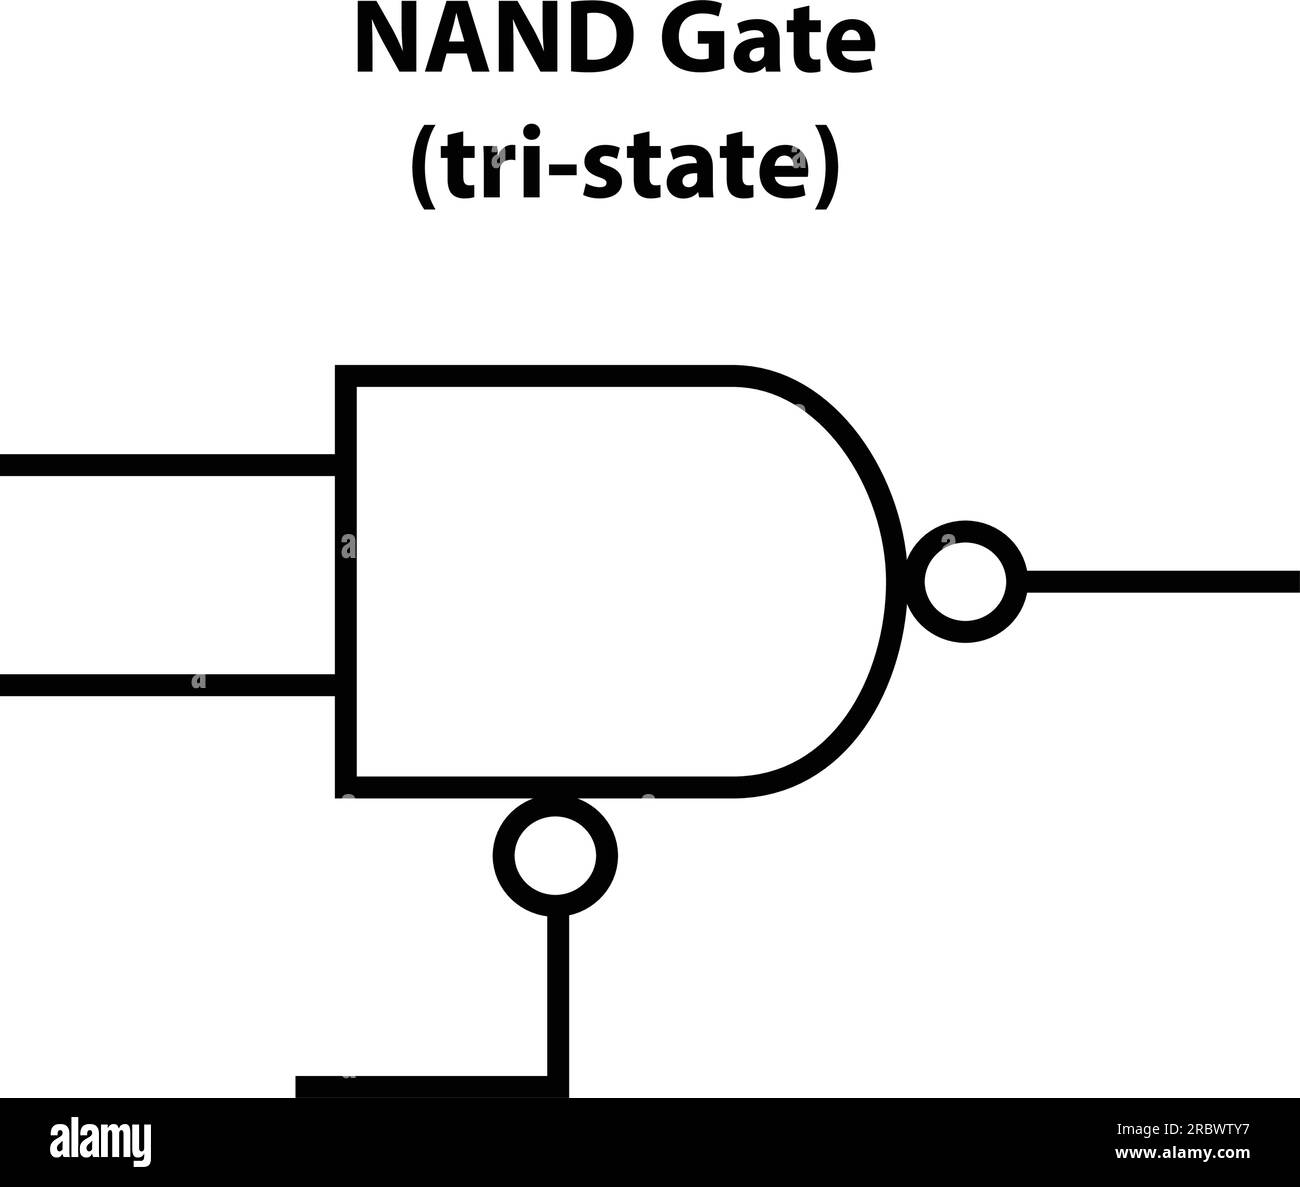 NAND gate (tri-state). electronic symbol of open switch Illustration of basic circuit symbols. Electrical symbols, study content of physics students. Stock Vector